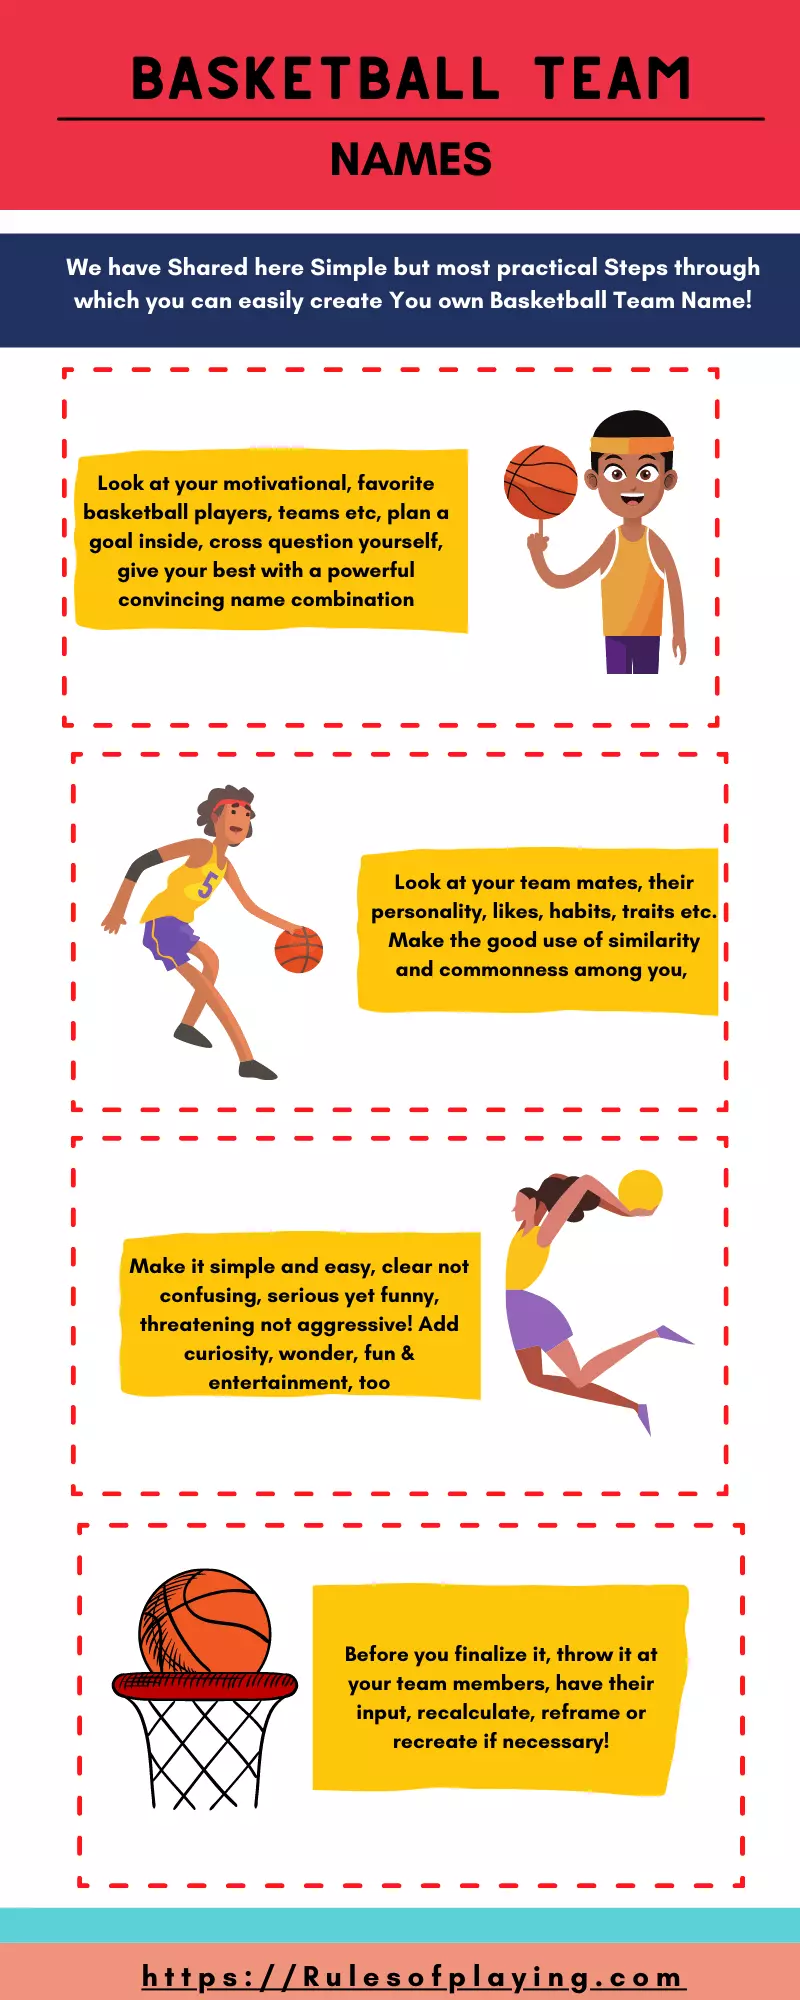 Basketball Team Names Guide- How to create your own